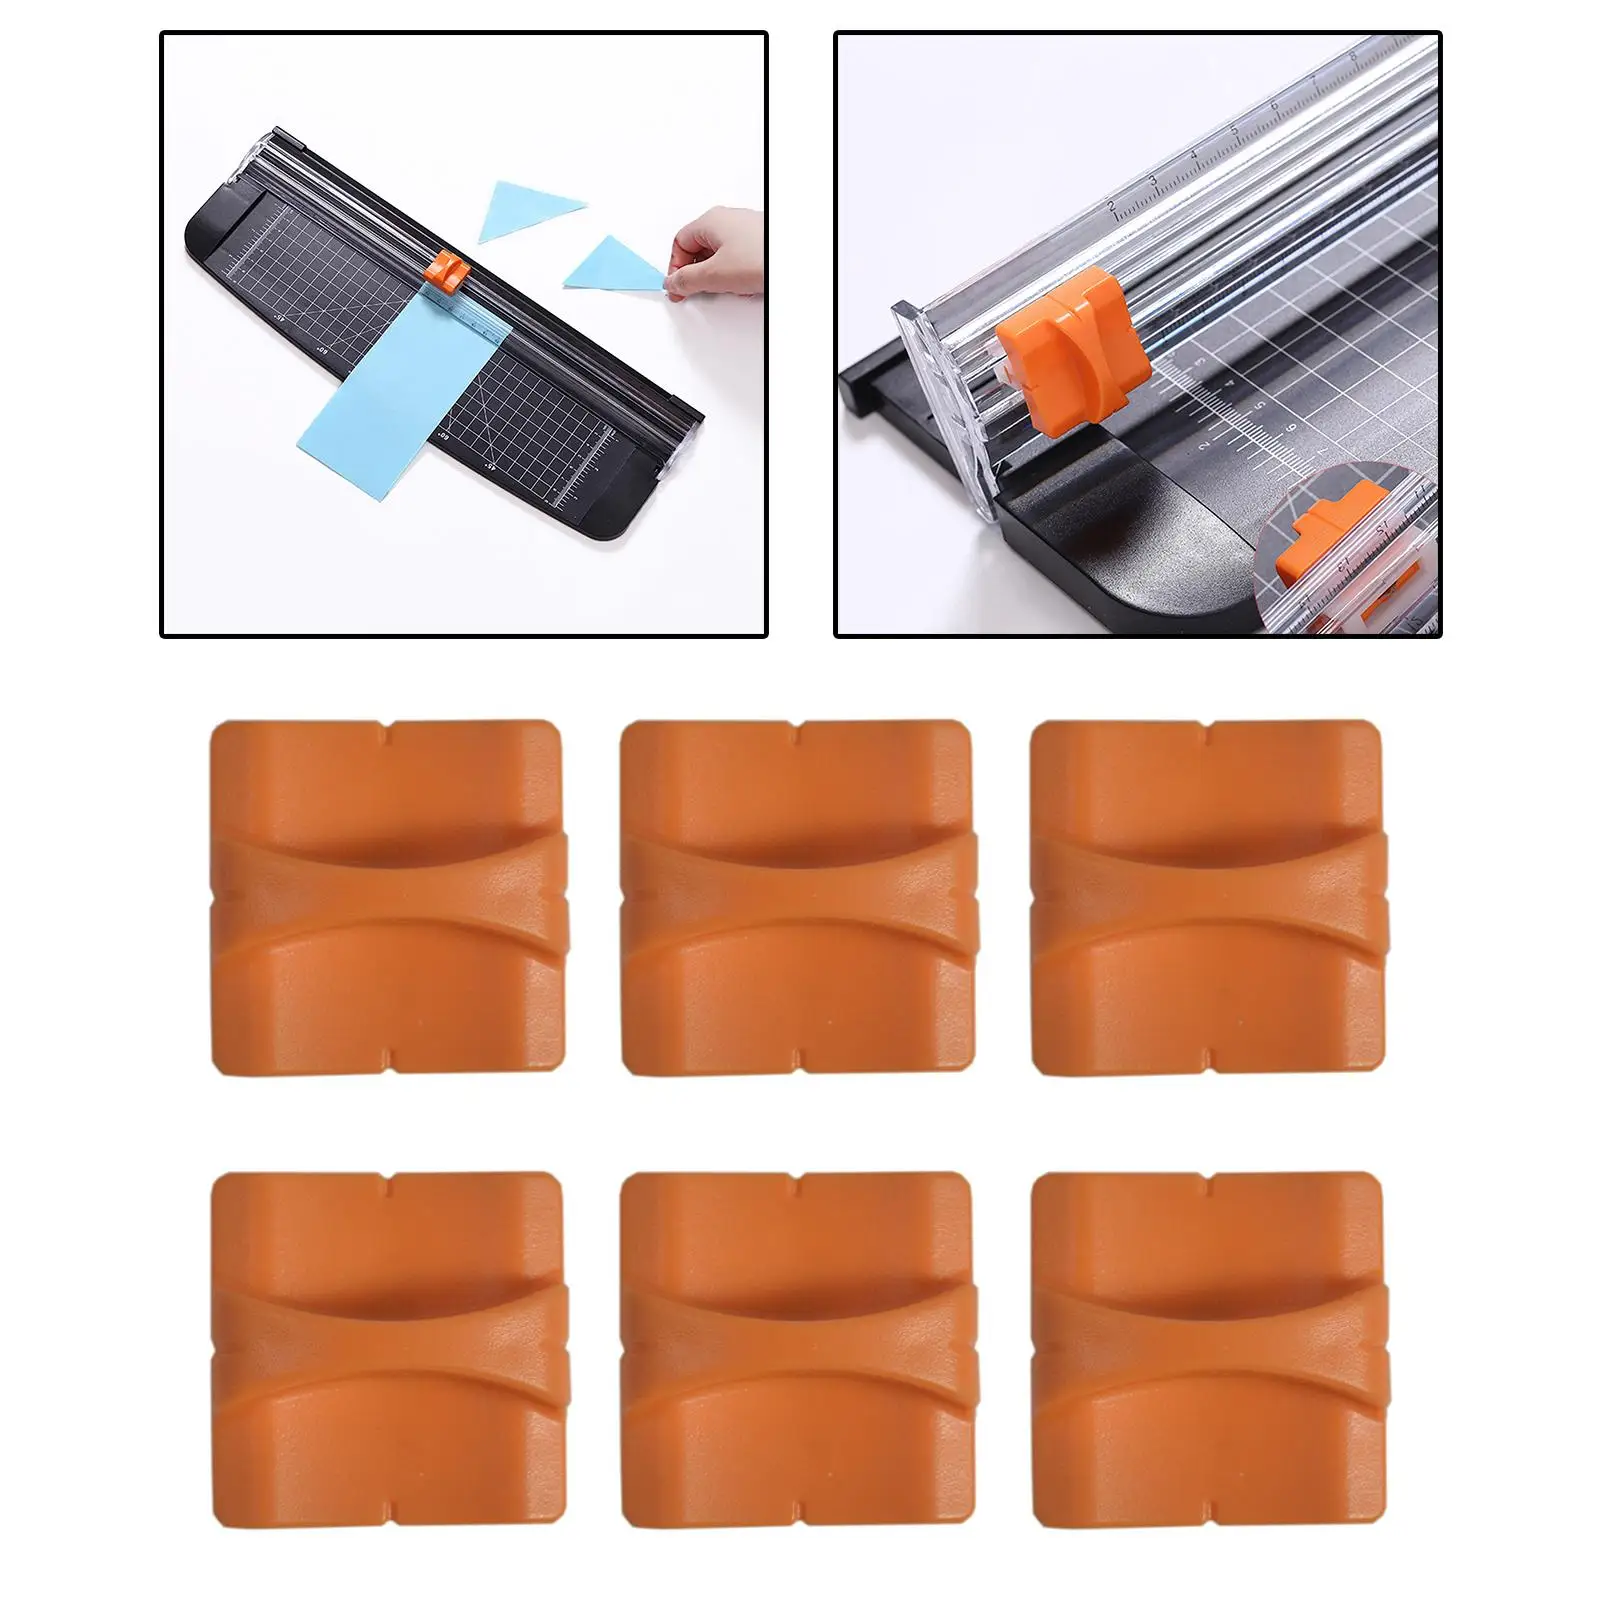 6Pcs Stainless Steel Paper Cutter Replacement   Refill Craft Paper Cutting Photo A4 Paper Album Trimming Tool Home Supplies